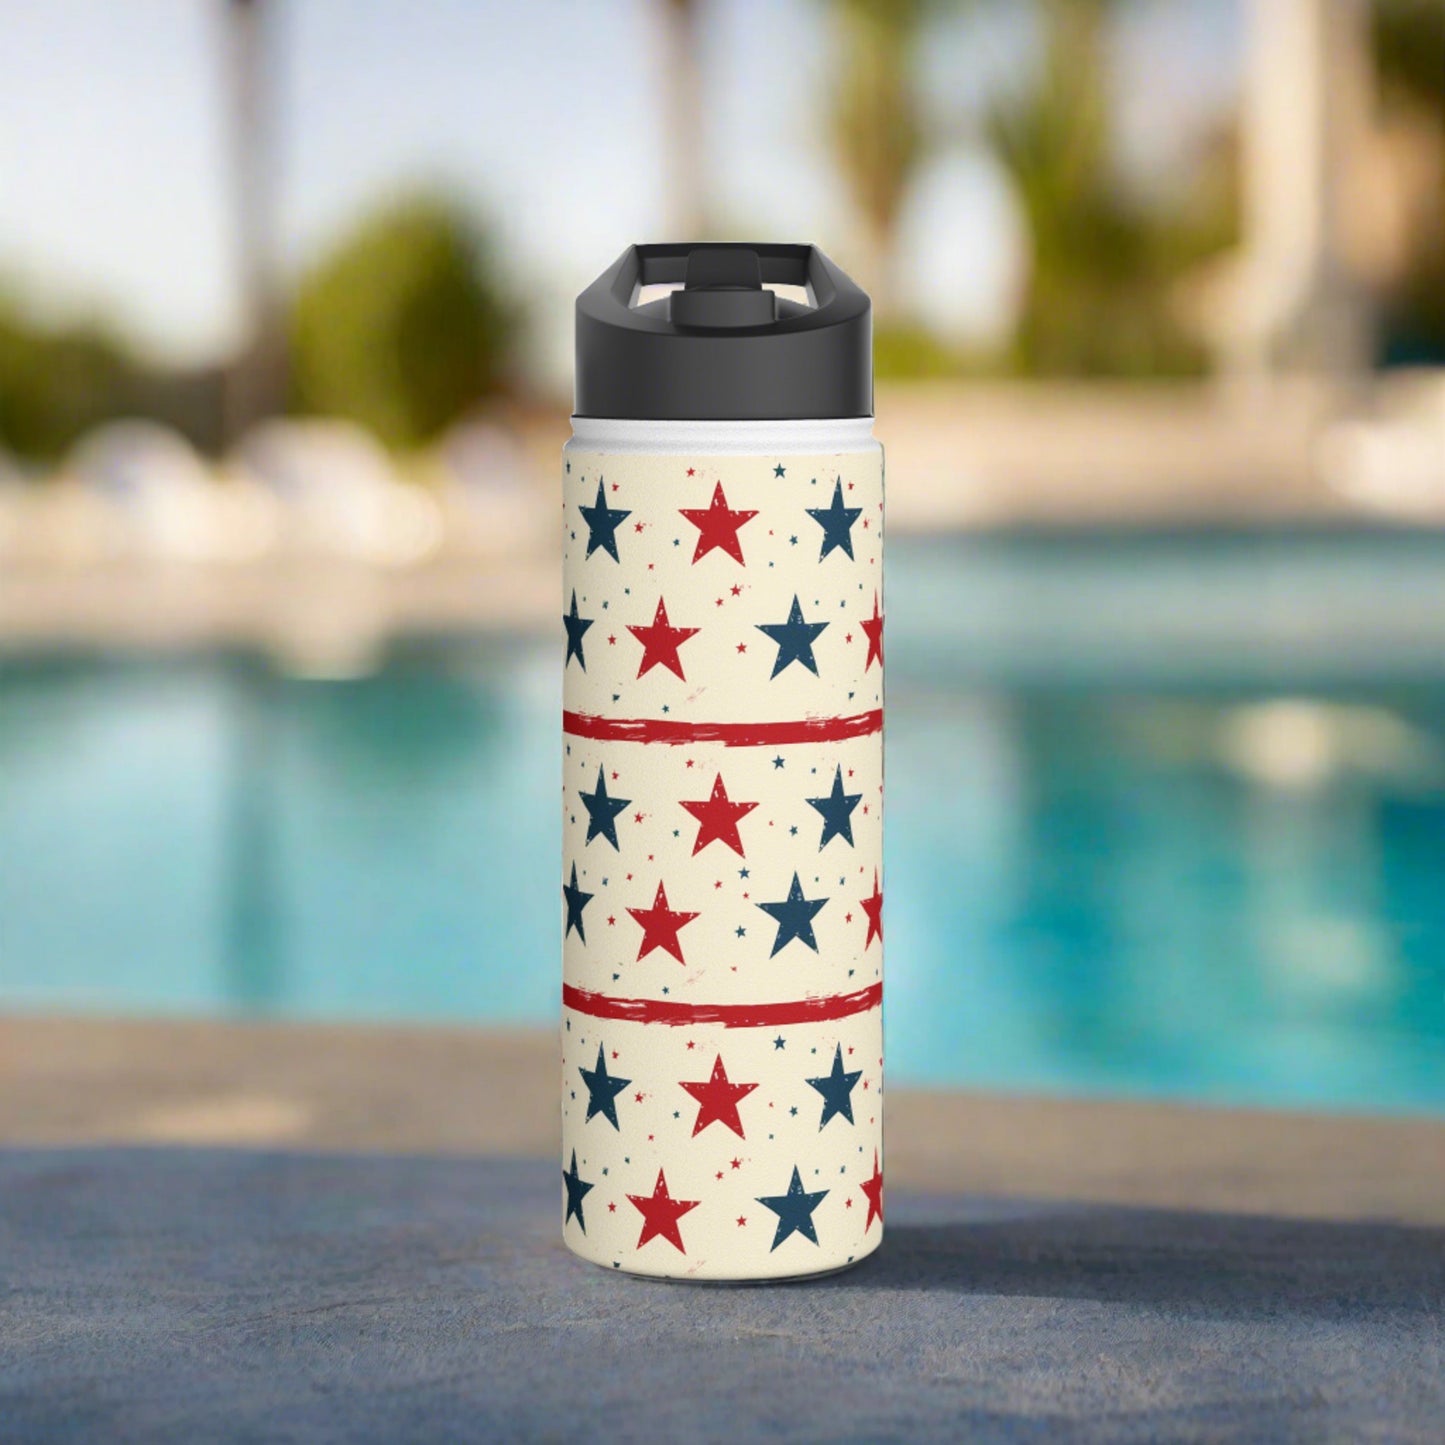 Stainless Steel Water Bottle Thermos, 18oz, Stars & Stripes - Double Wall Insulation Keeps Drinks Hot or Cold